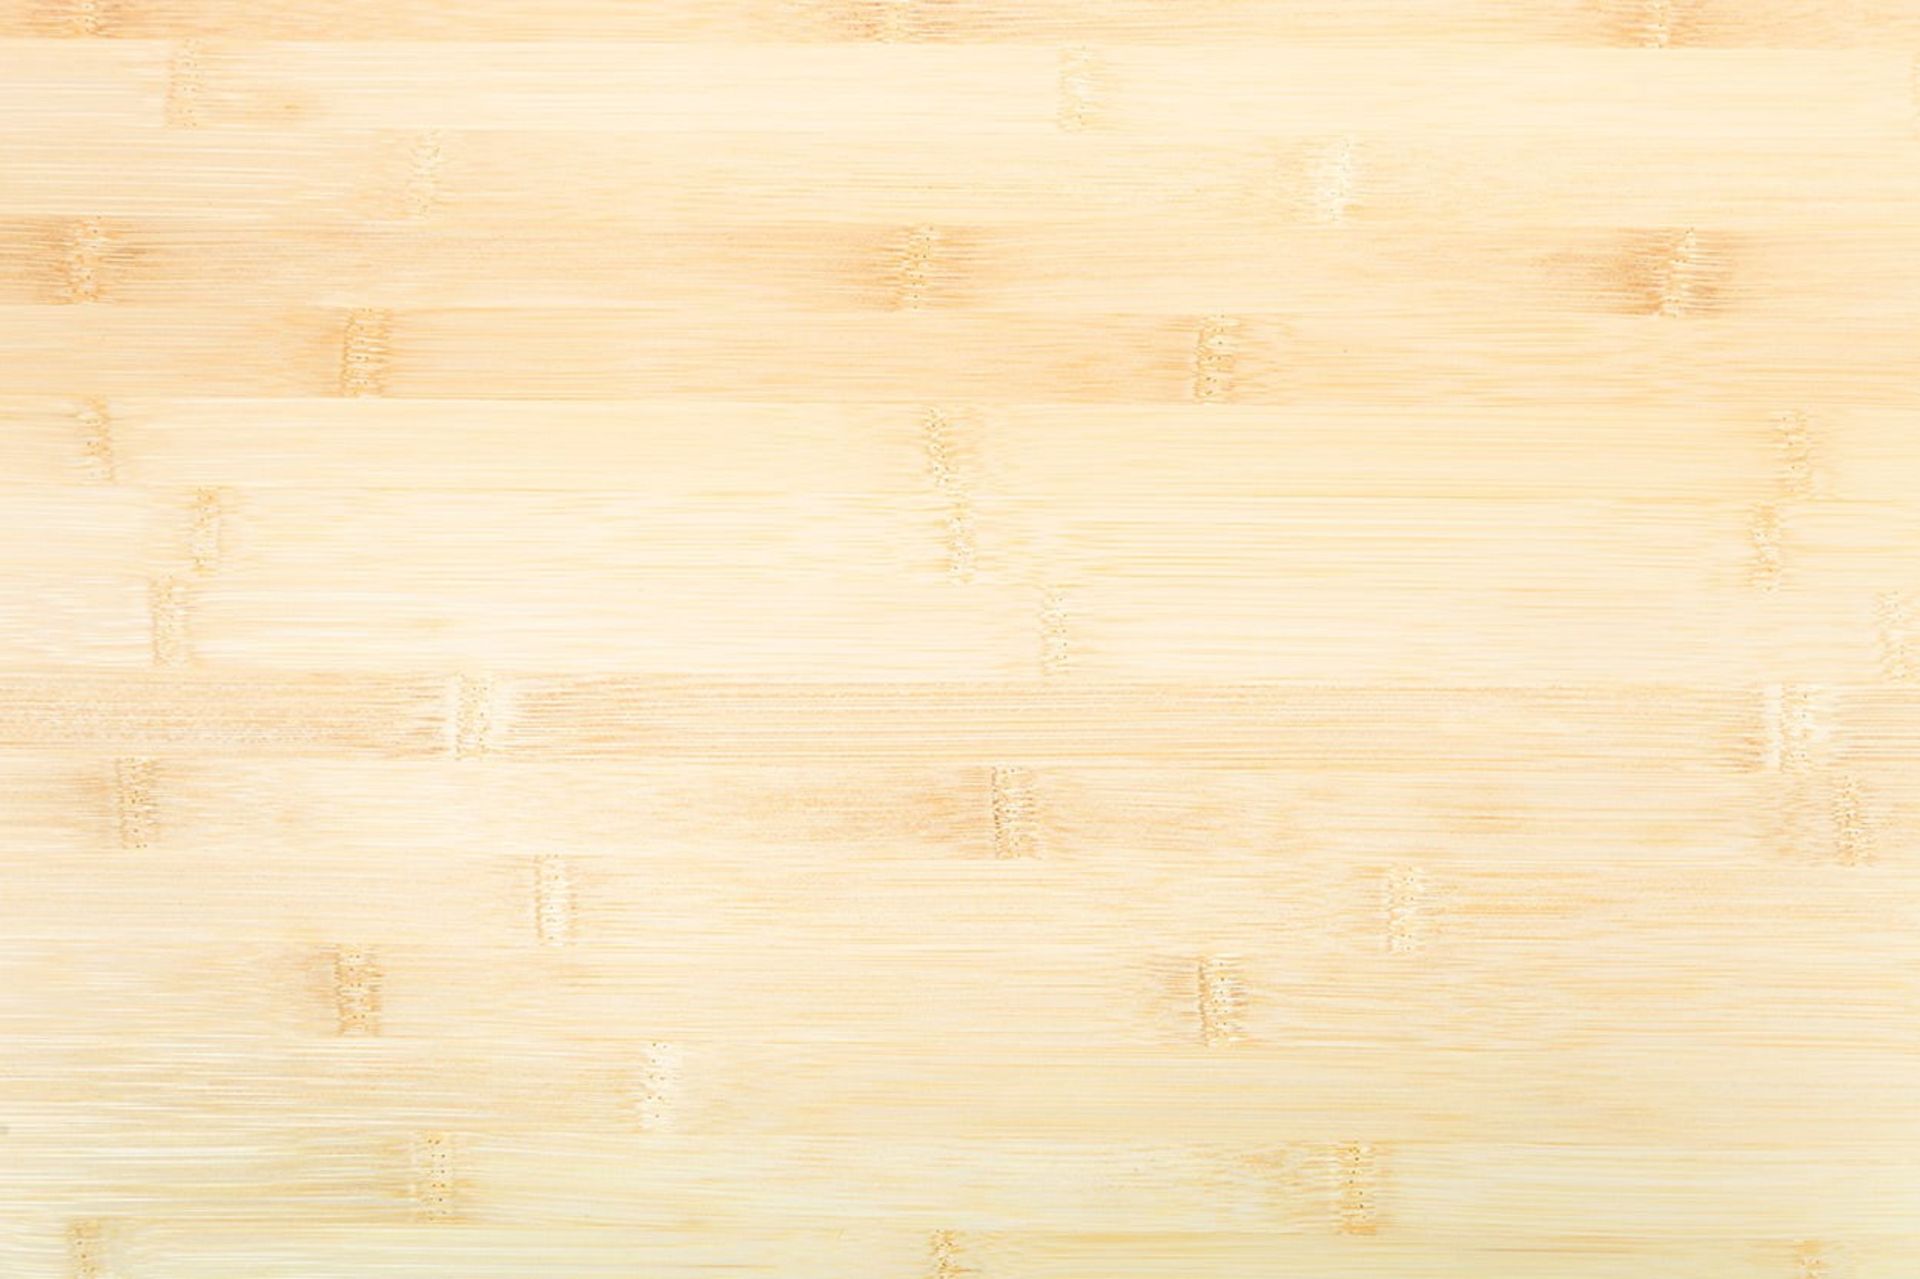 1 x Layered Solid Bamboo Wood Worktop - Size: 4000 x 650 x 40mm - Ideal For Kitchens, Countertops, - Image 3 of 5